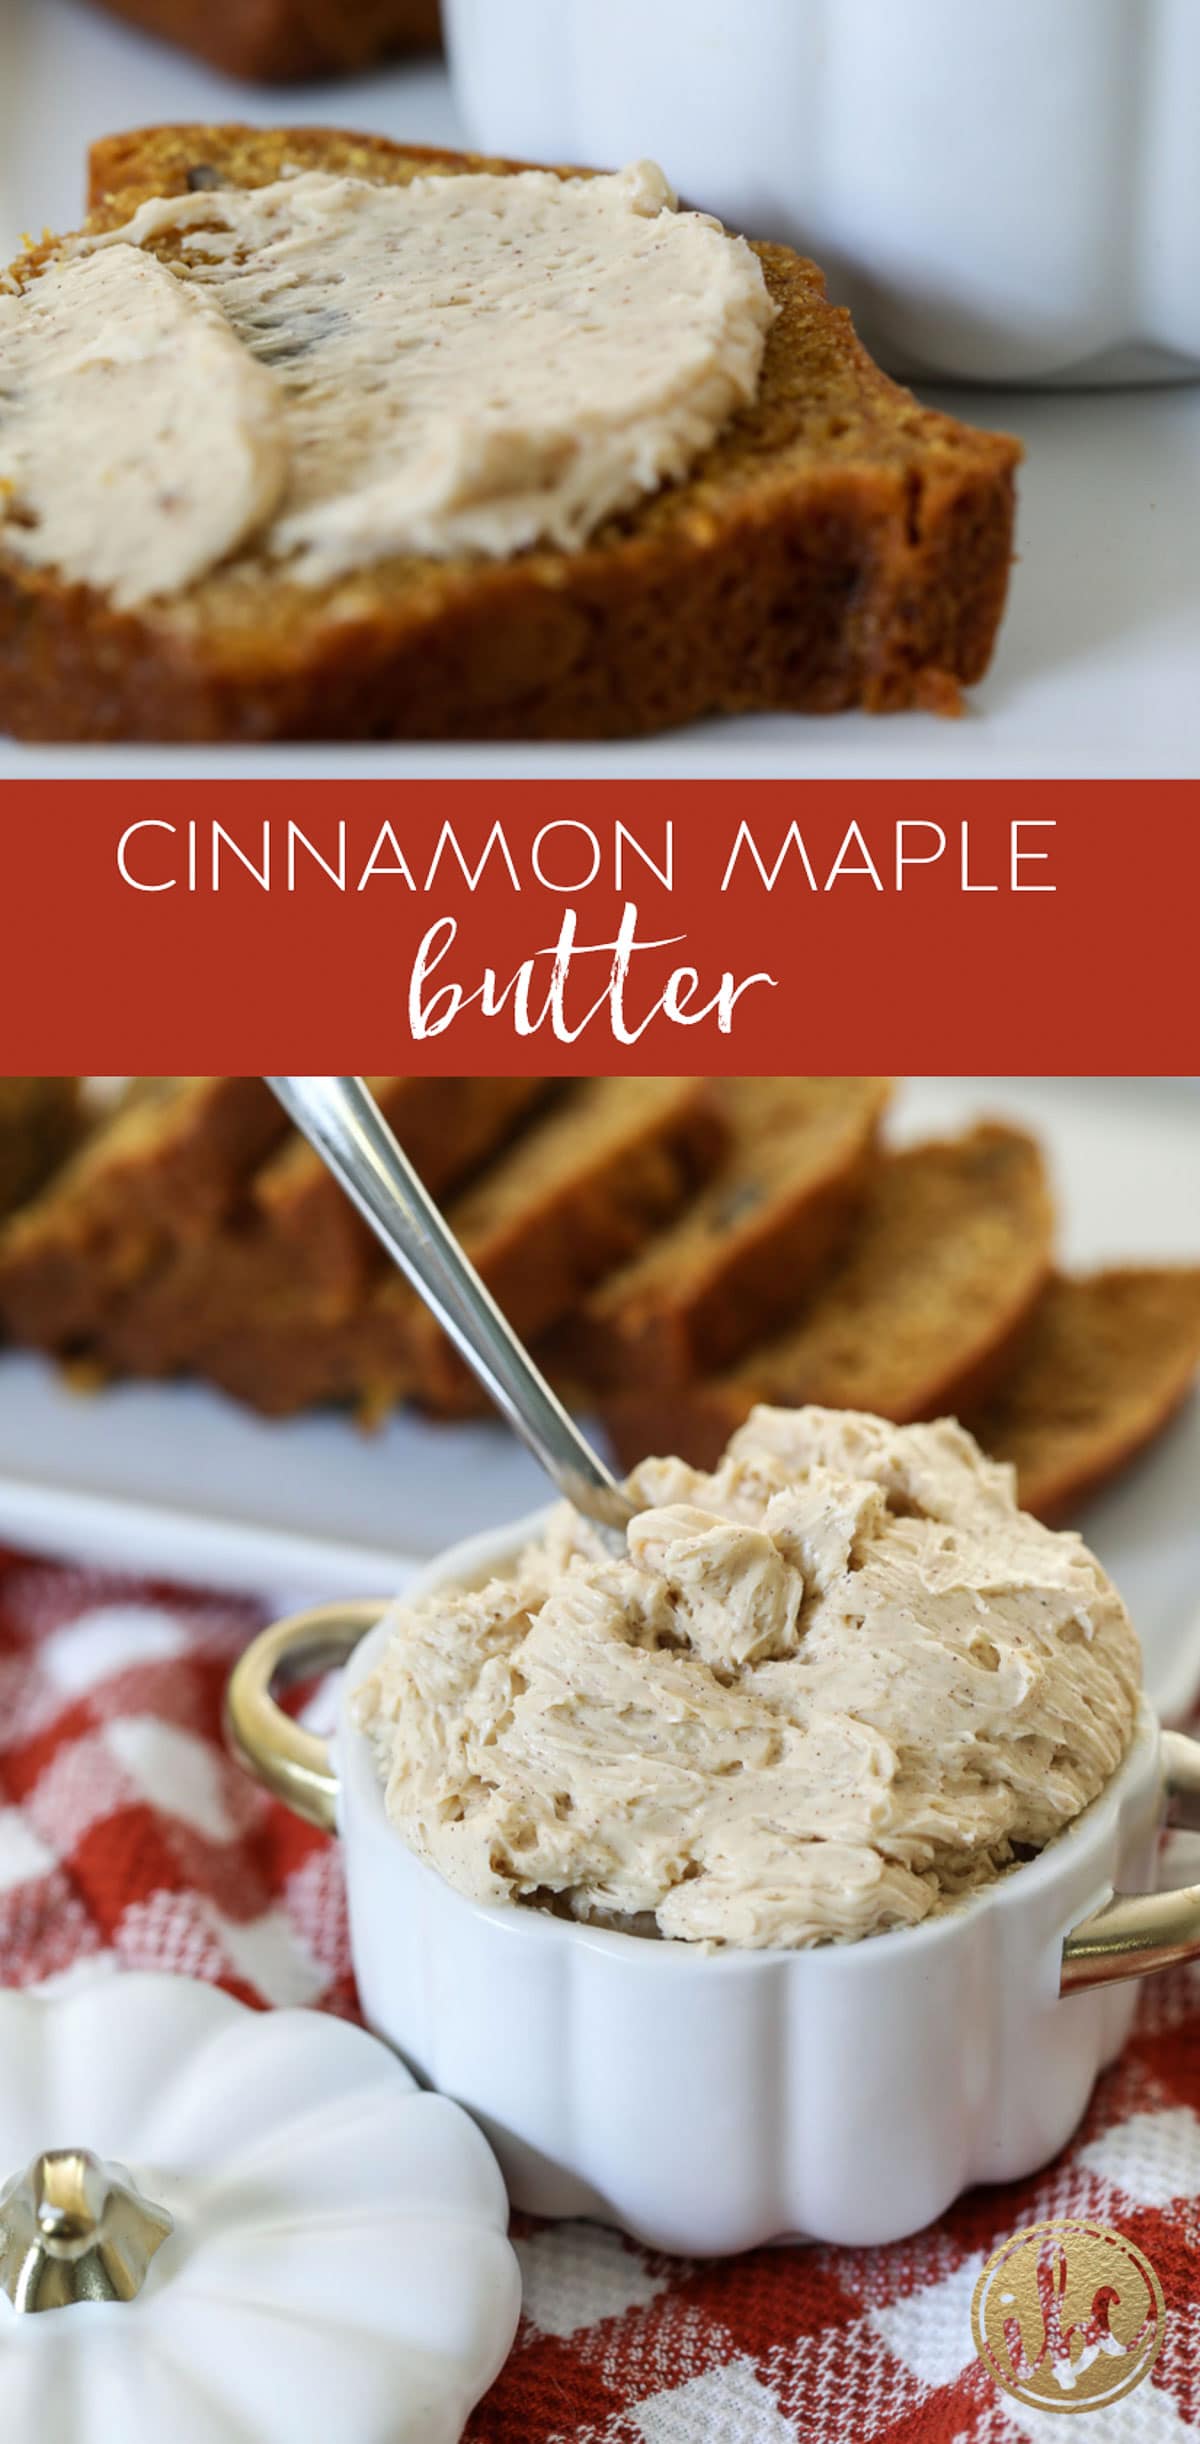 Add this Cinnamon Maple Butter to your fall baking sweets. #cinnamon #maple #butter #recipe #fallbaking